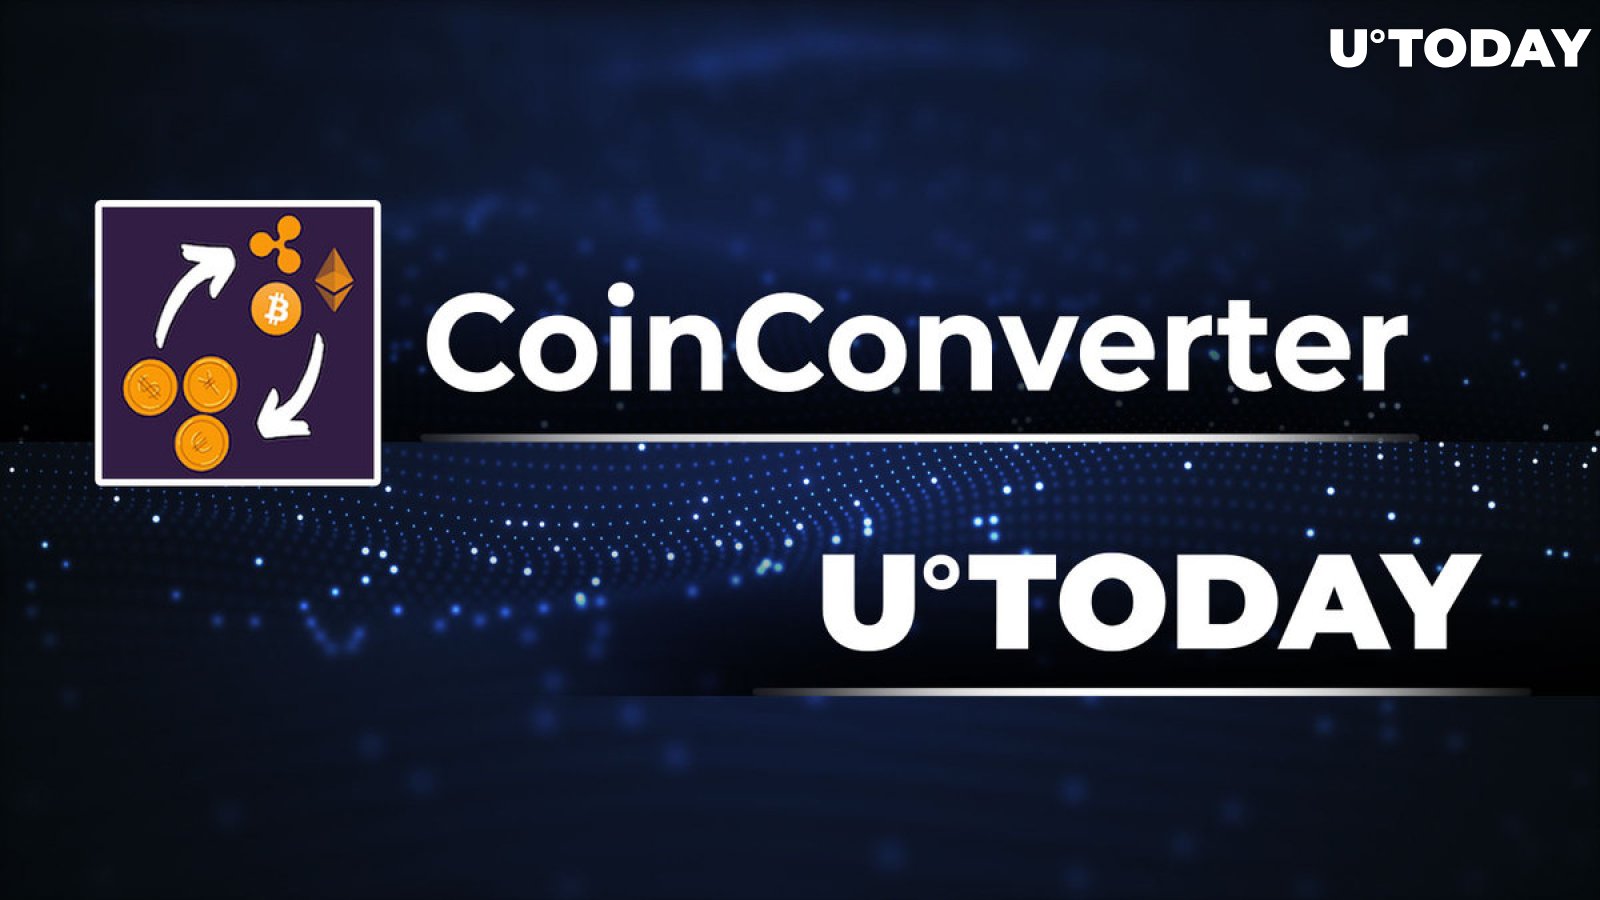 CoinConverter Crypto App Adds News Content by U.Today